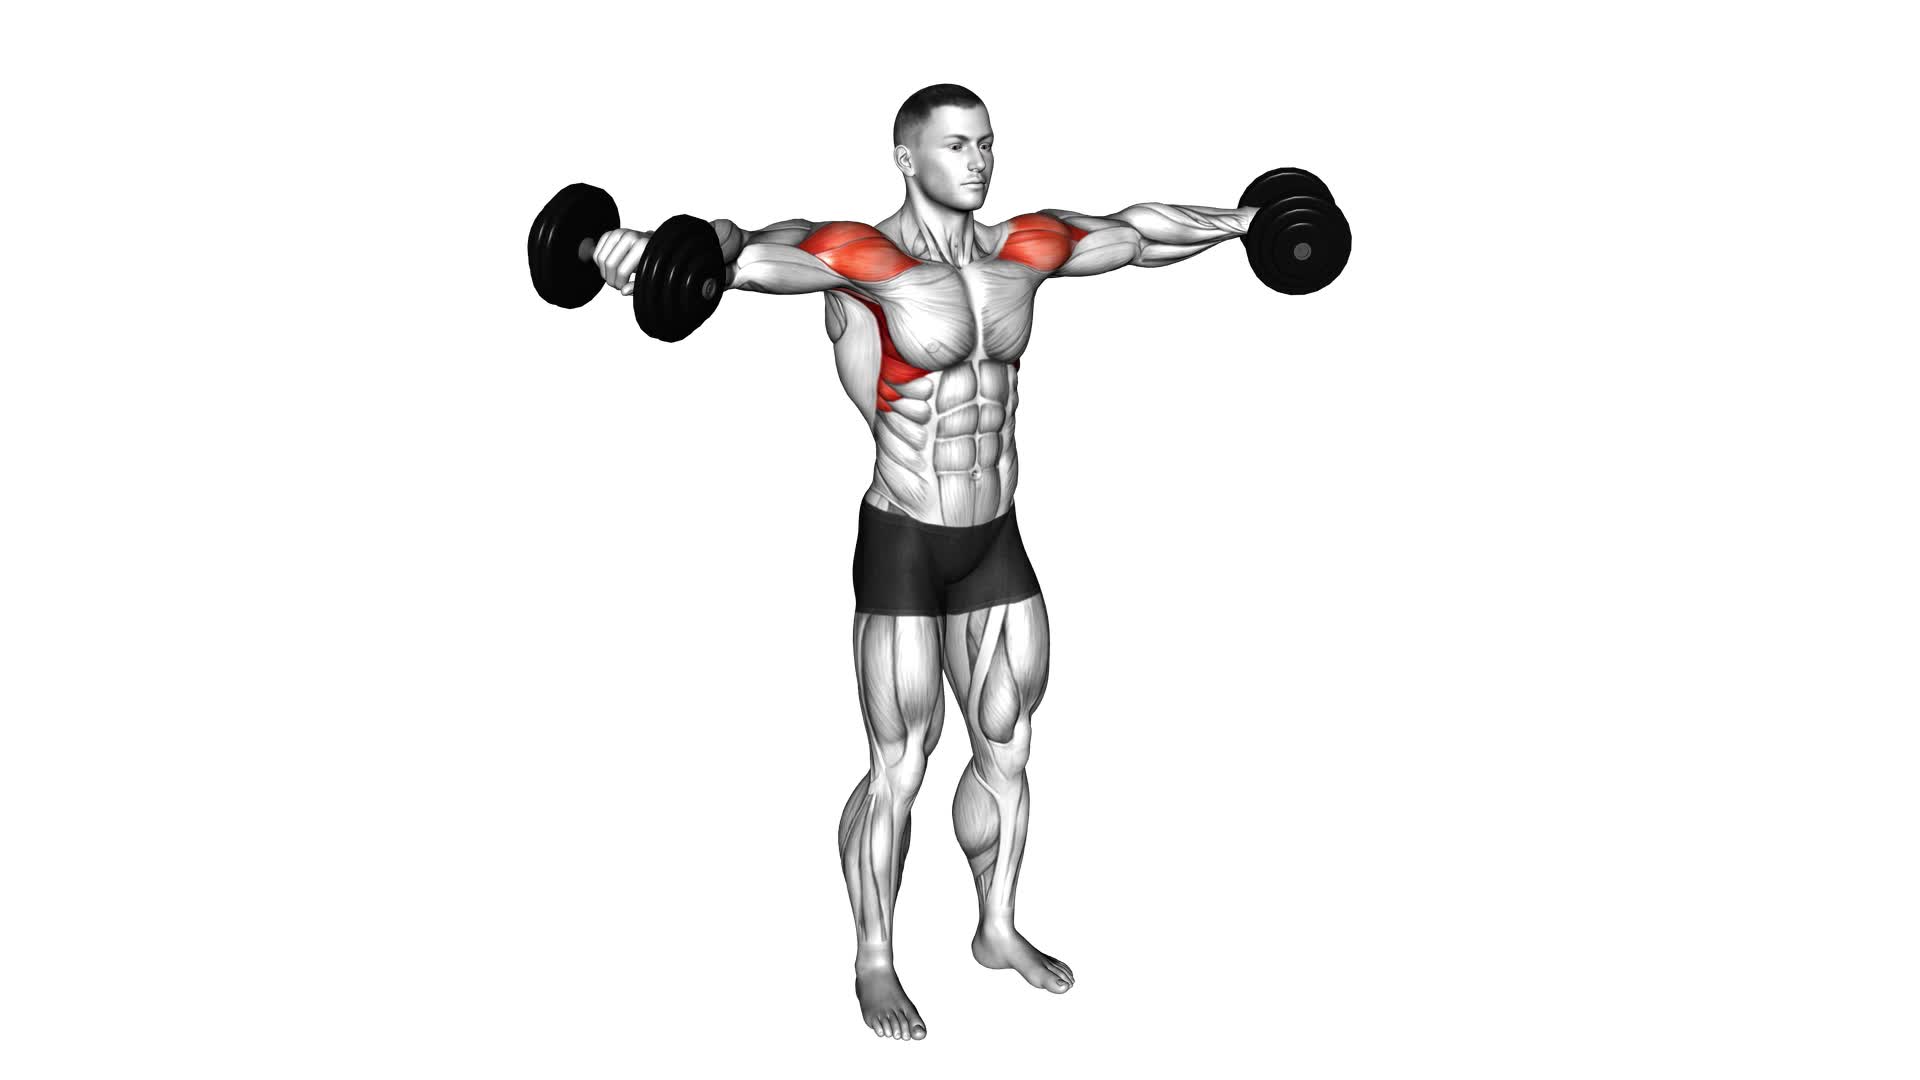 Dumbbell Lateral Raise - Video Exercise Guide & Tips